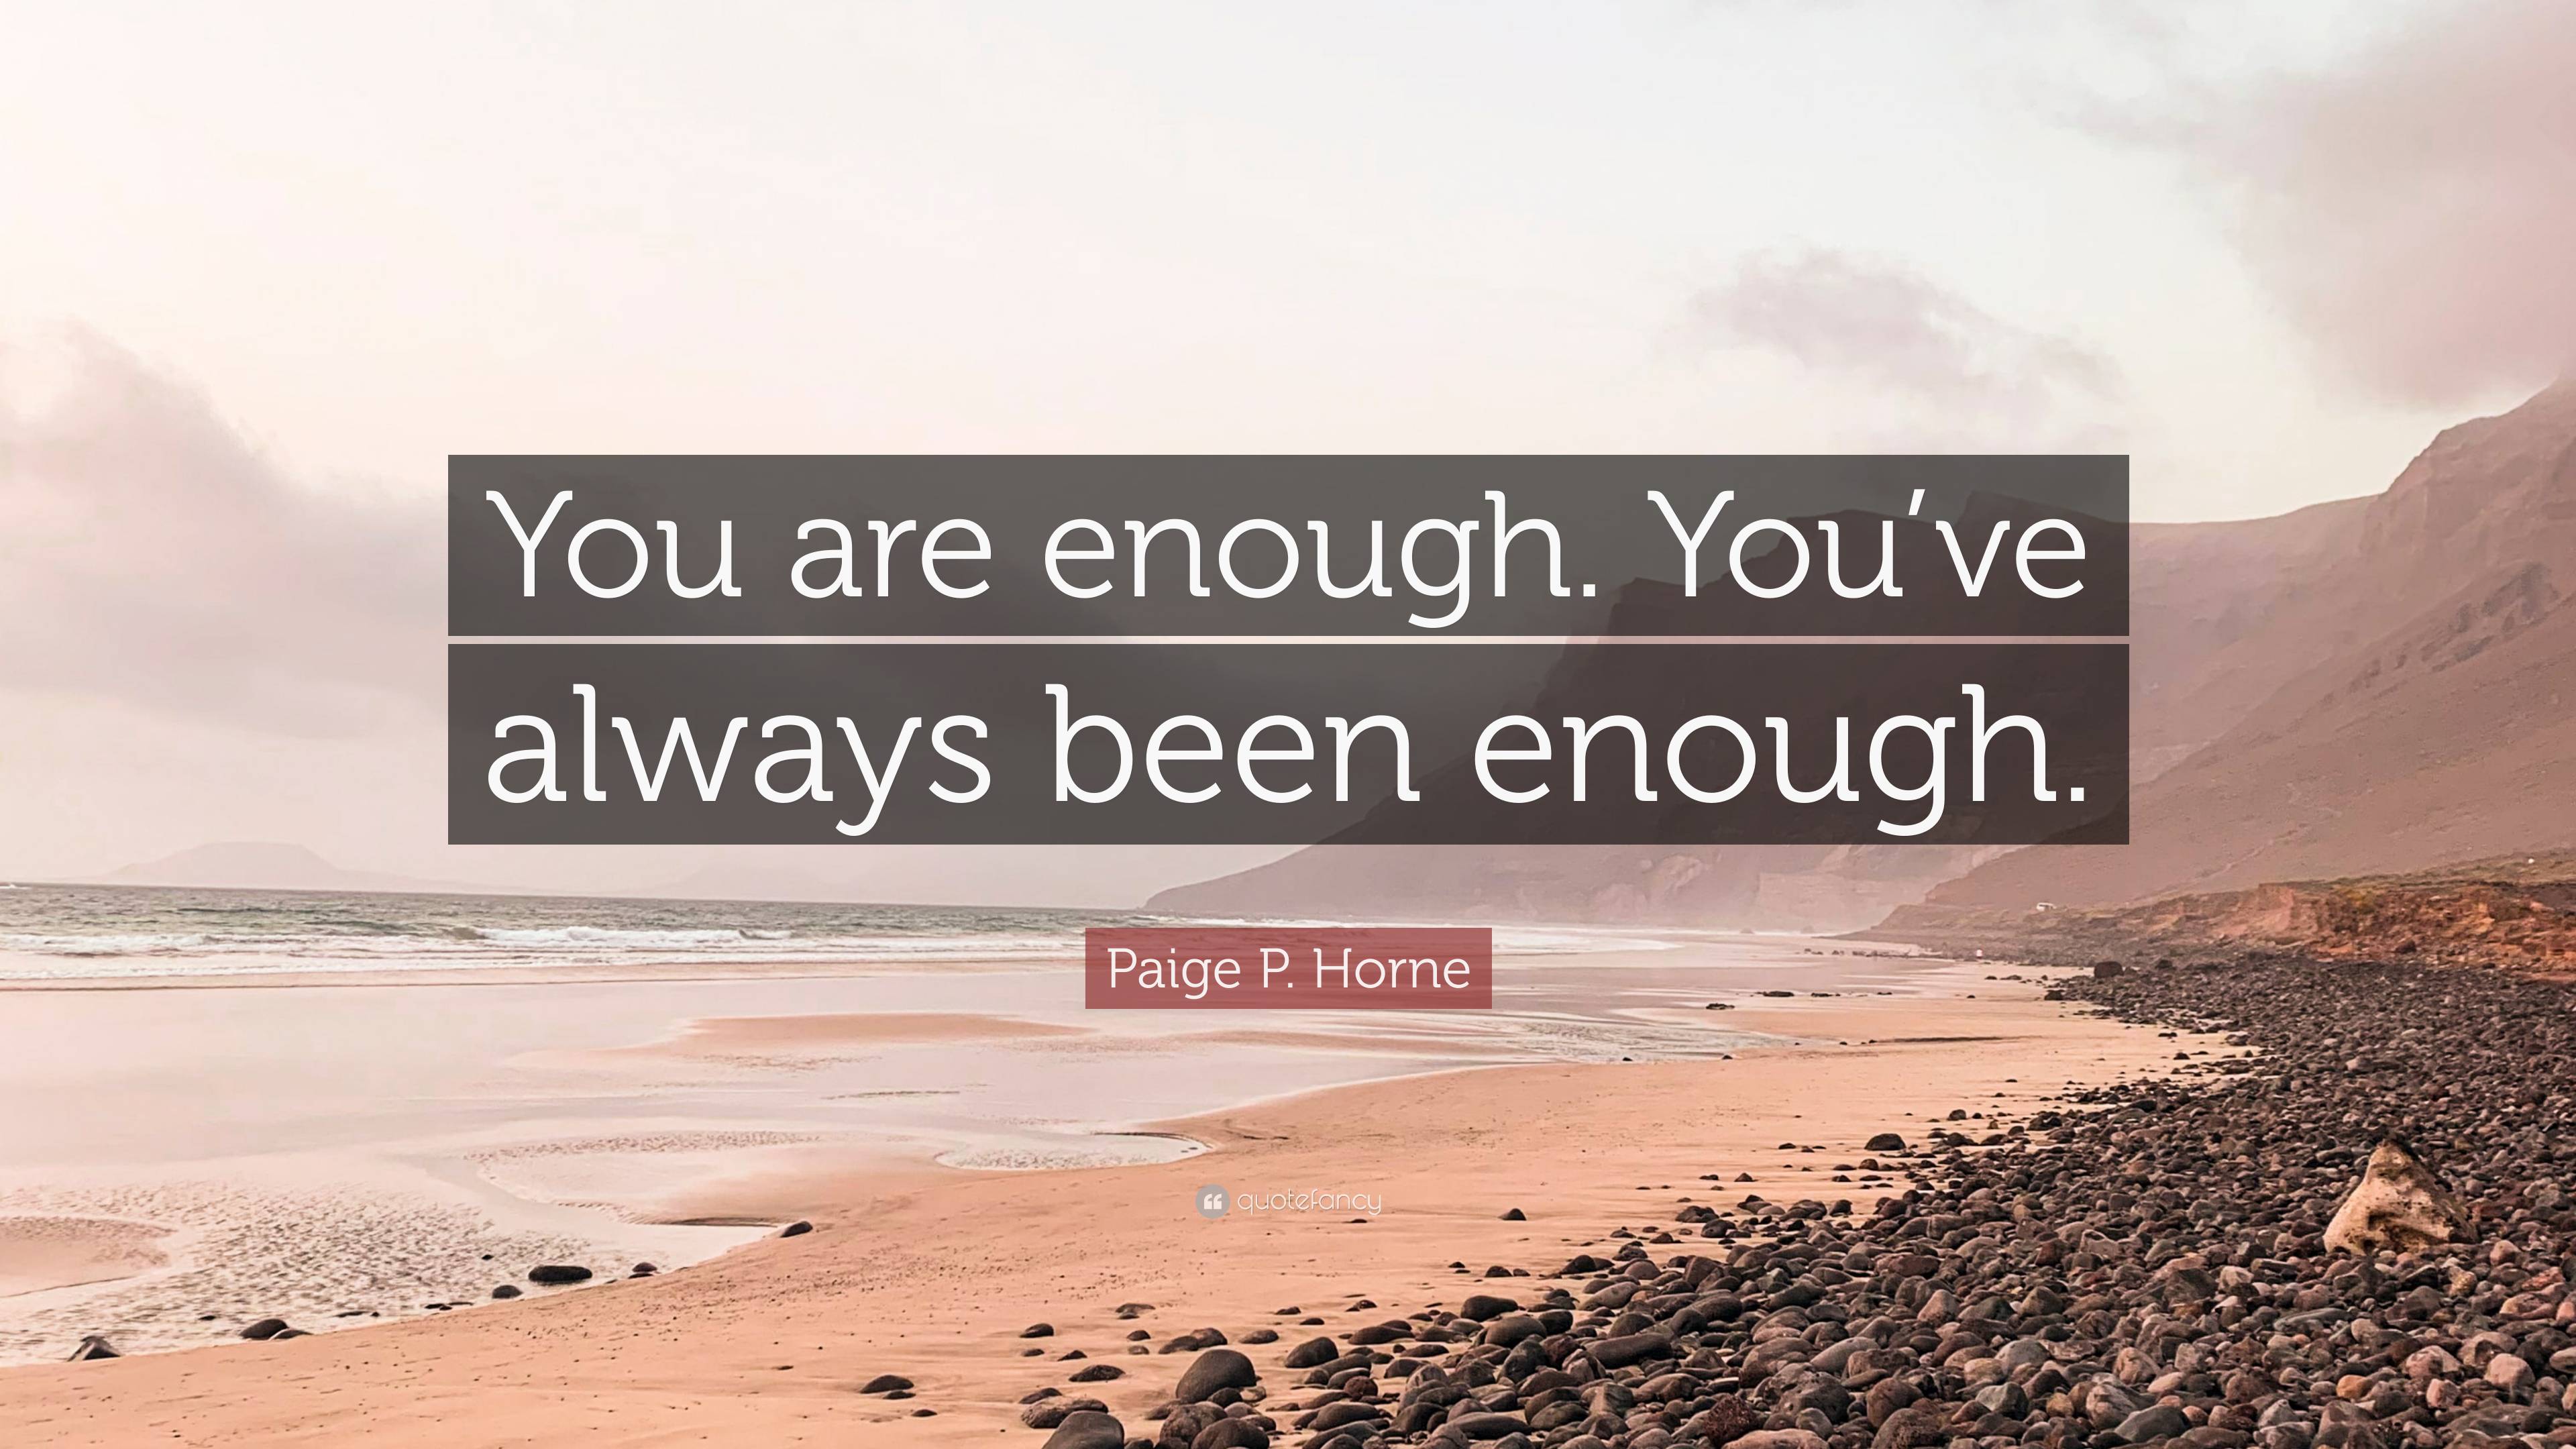 Paige P. Horne Quote: “You are enough. You've always been enough.” (2 wallpaper)